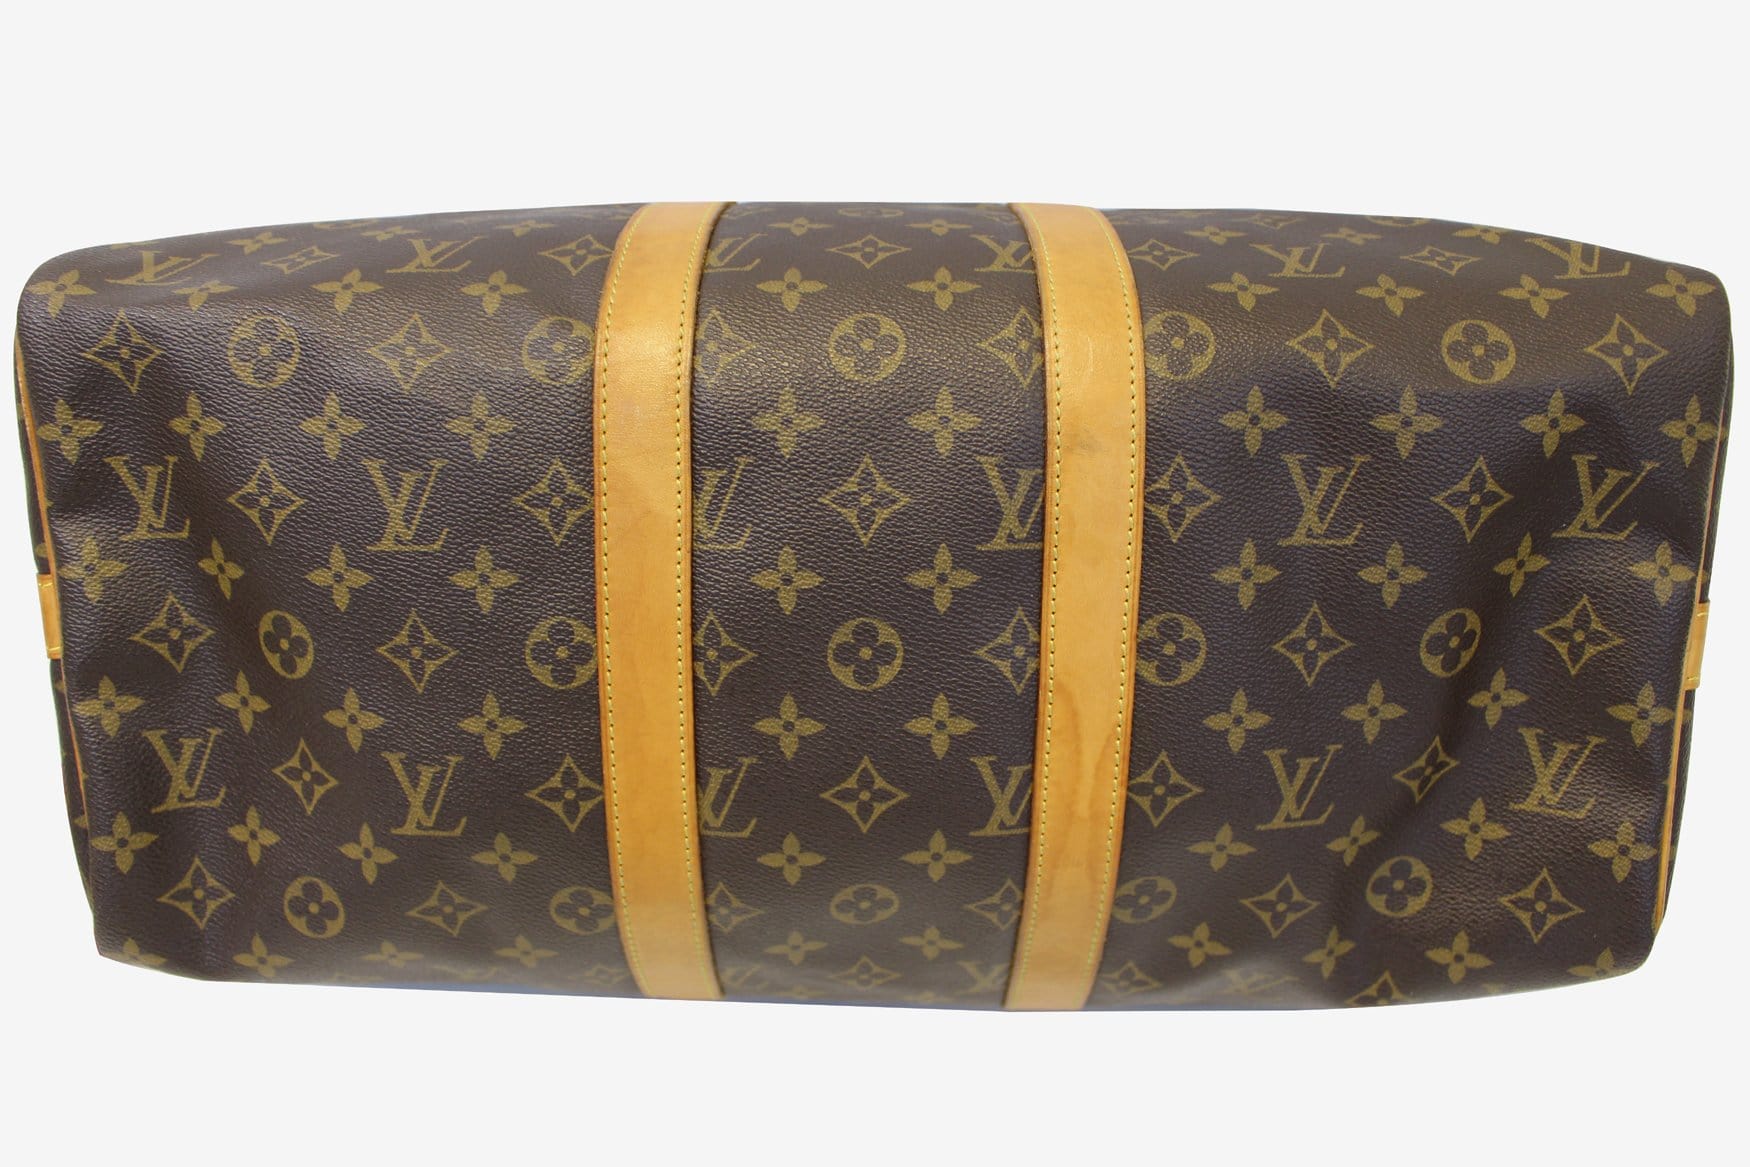 Louis Vuitton by The French Company Monogram Keepall Bag Travel Duffle 45cm